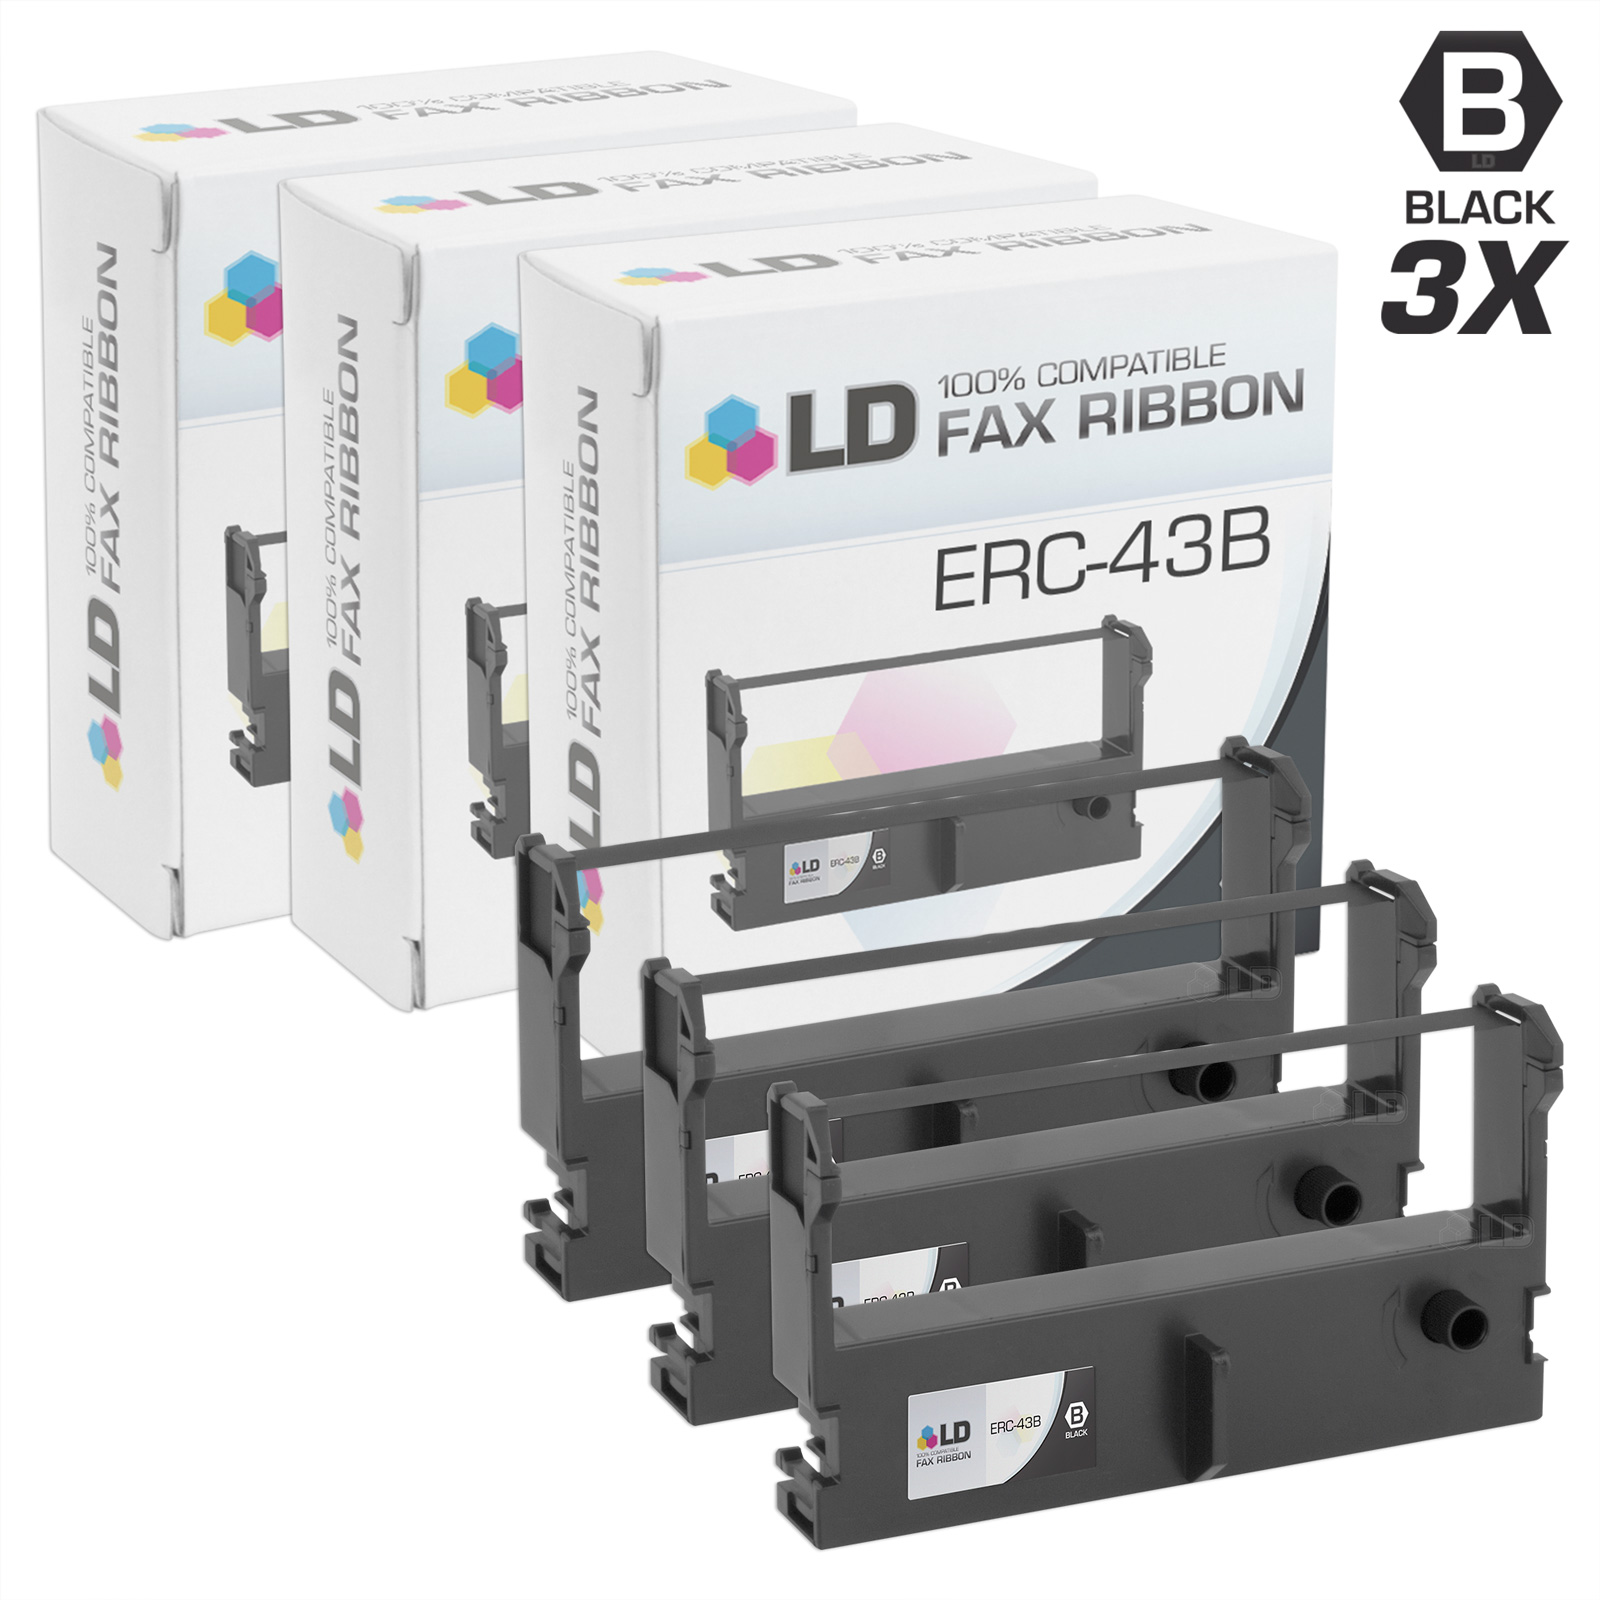 LD Compatible Ribbon Cartridge Replacement for Epson ERC-43 (Black, 3-Pack) - image 1 of 1